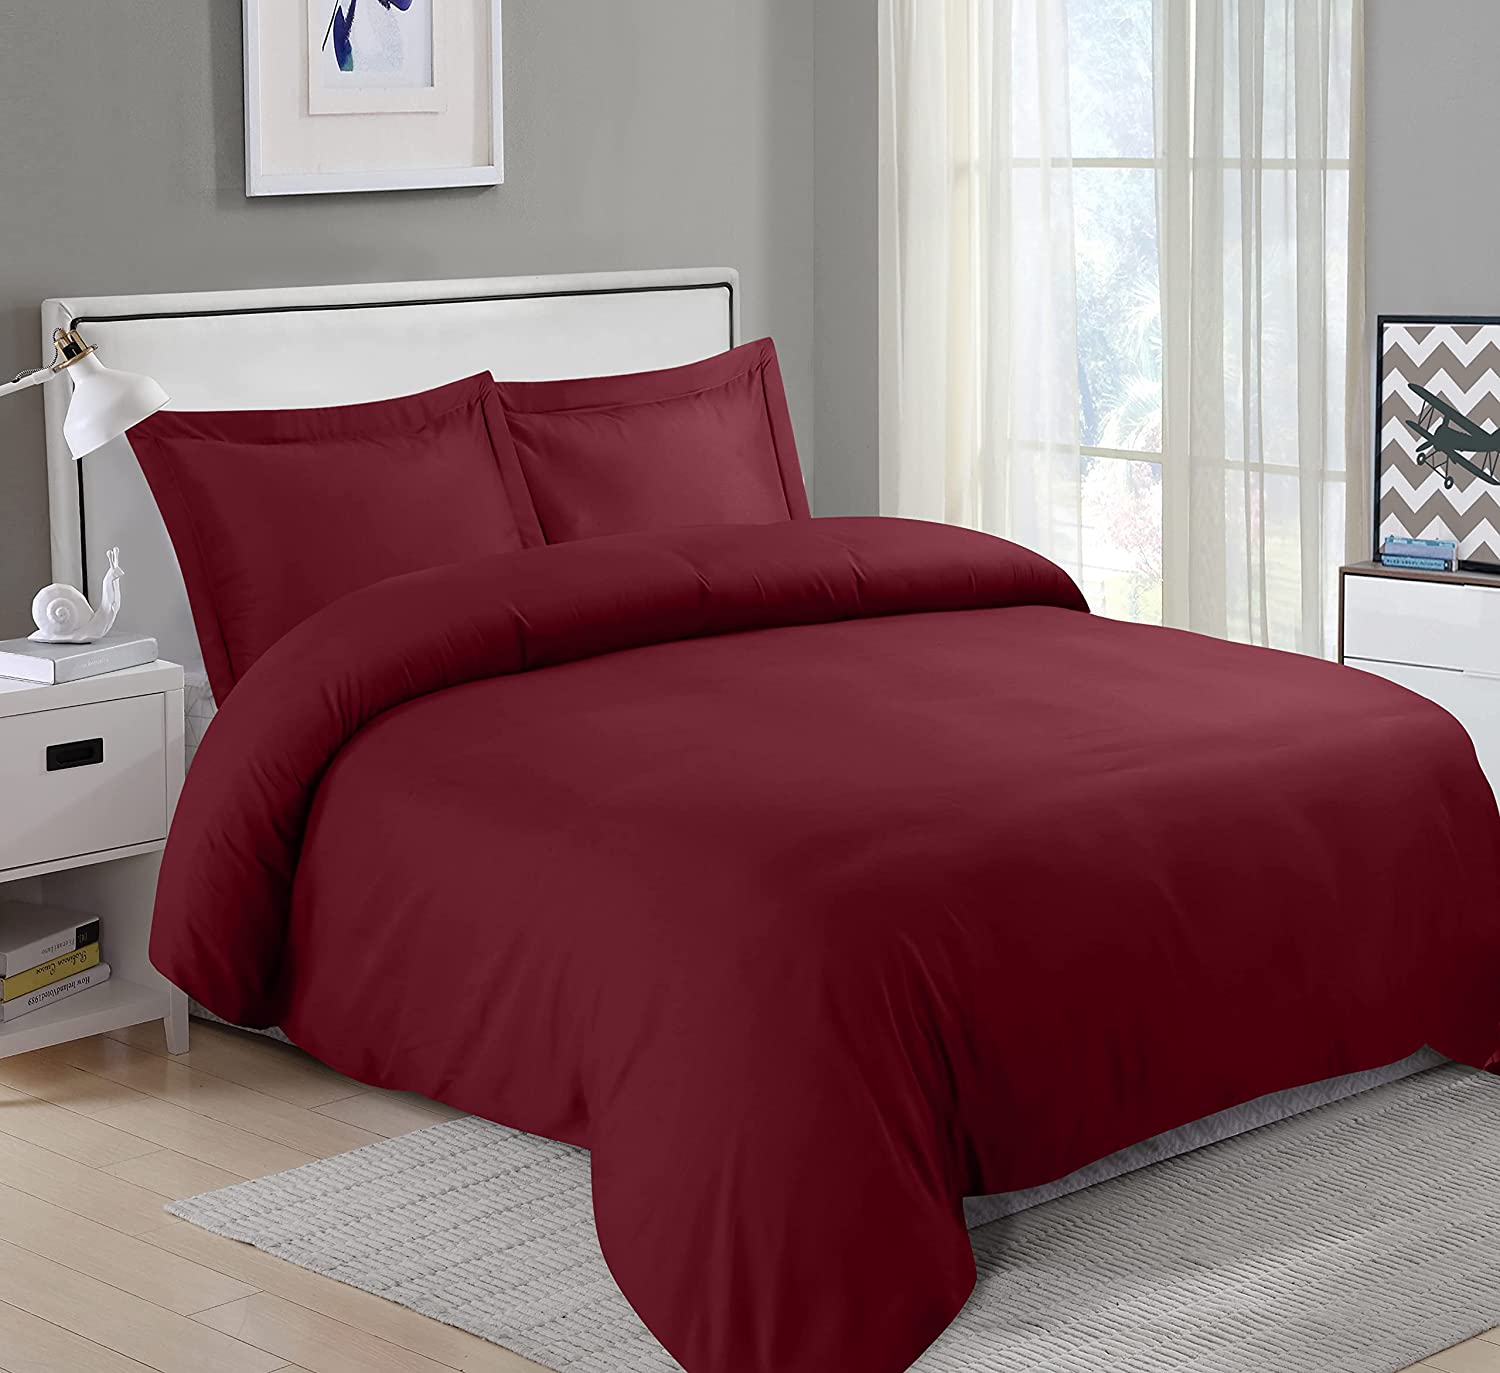 Duvet Cover King Size Set - 1 Duvet Cover with 2 Pillow Shams - 3 Pieces Comforter Cover with Zipper Closure - Ultra Soft Brushed - Maroon